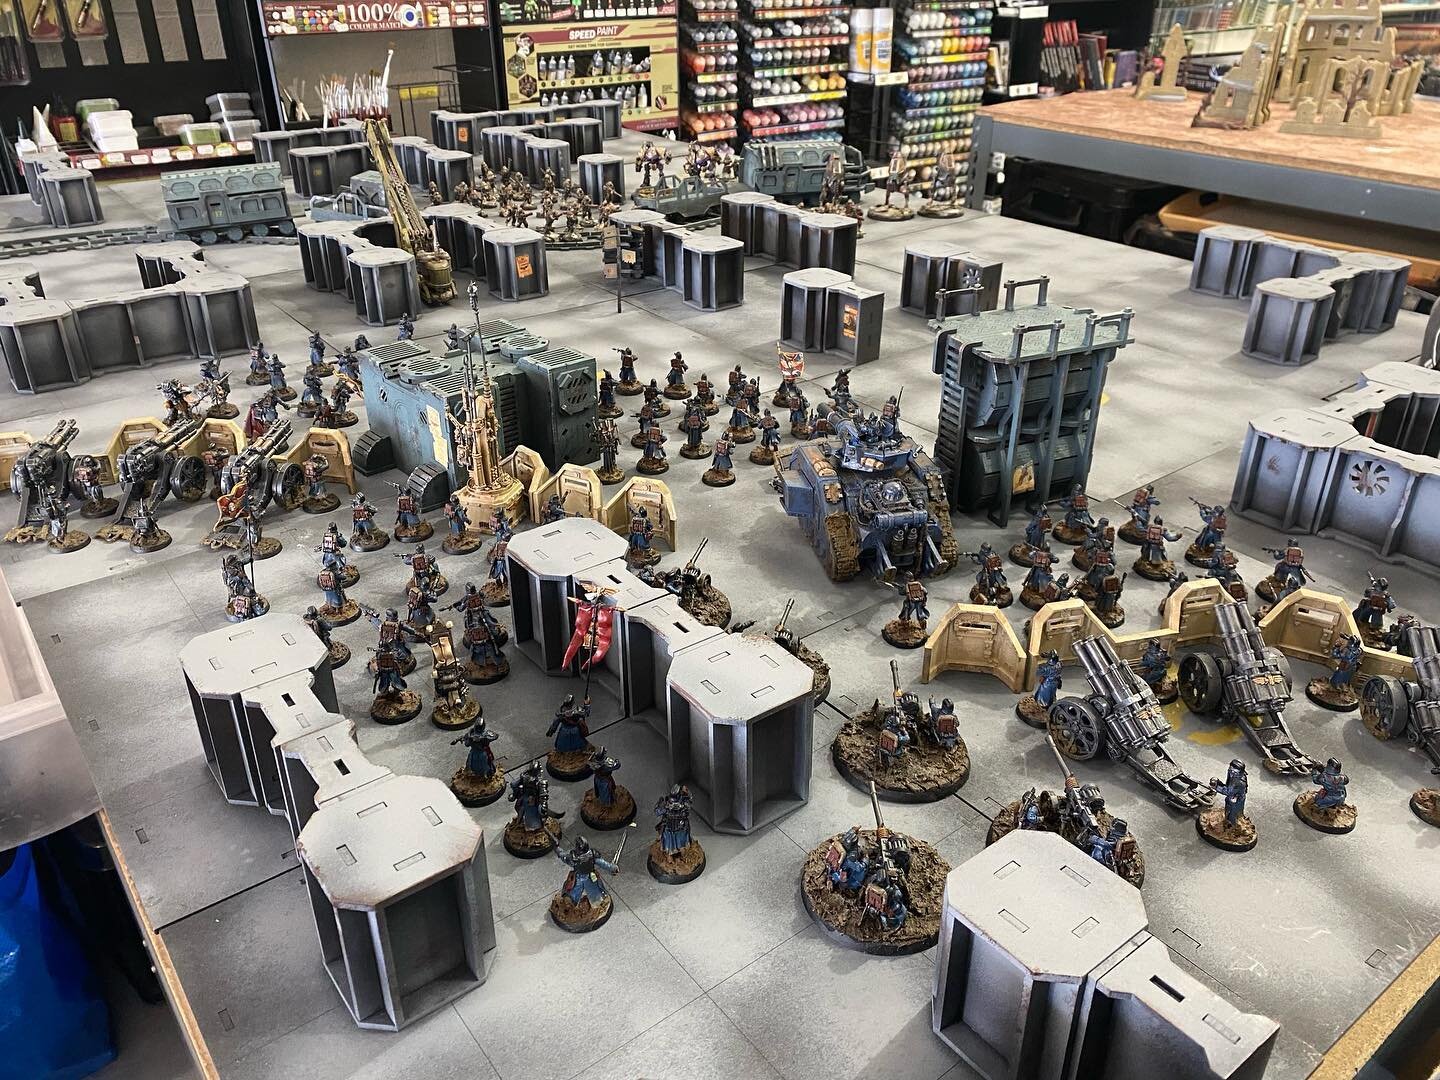 Some fantastic games today at @boardsswords with @tabletopbanter and @tales_from_new_aurora for #mortalsduty

Great game with @mutantsnakeeyes and @throwindicepod to round out the day!

#thehobbybutterflies #hobbybutterflies #30k #horusheresy #hardfo